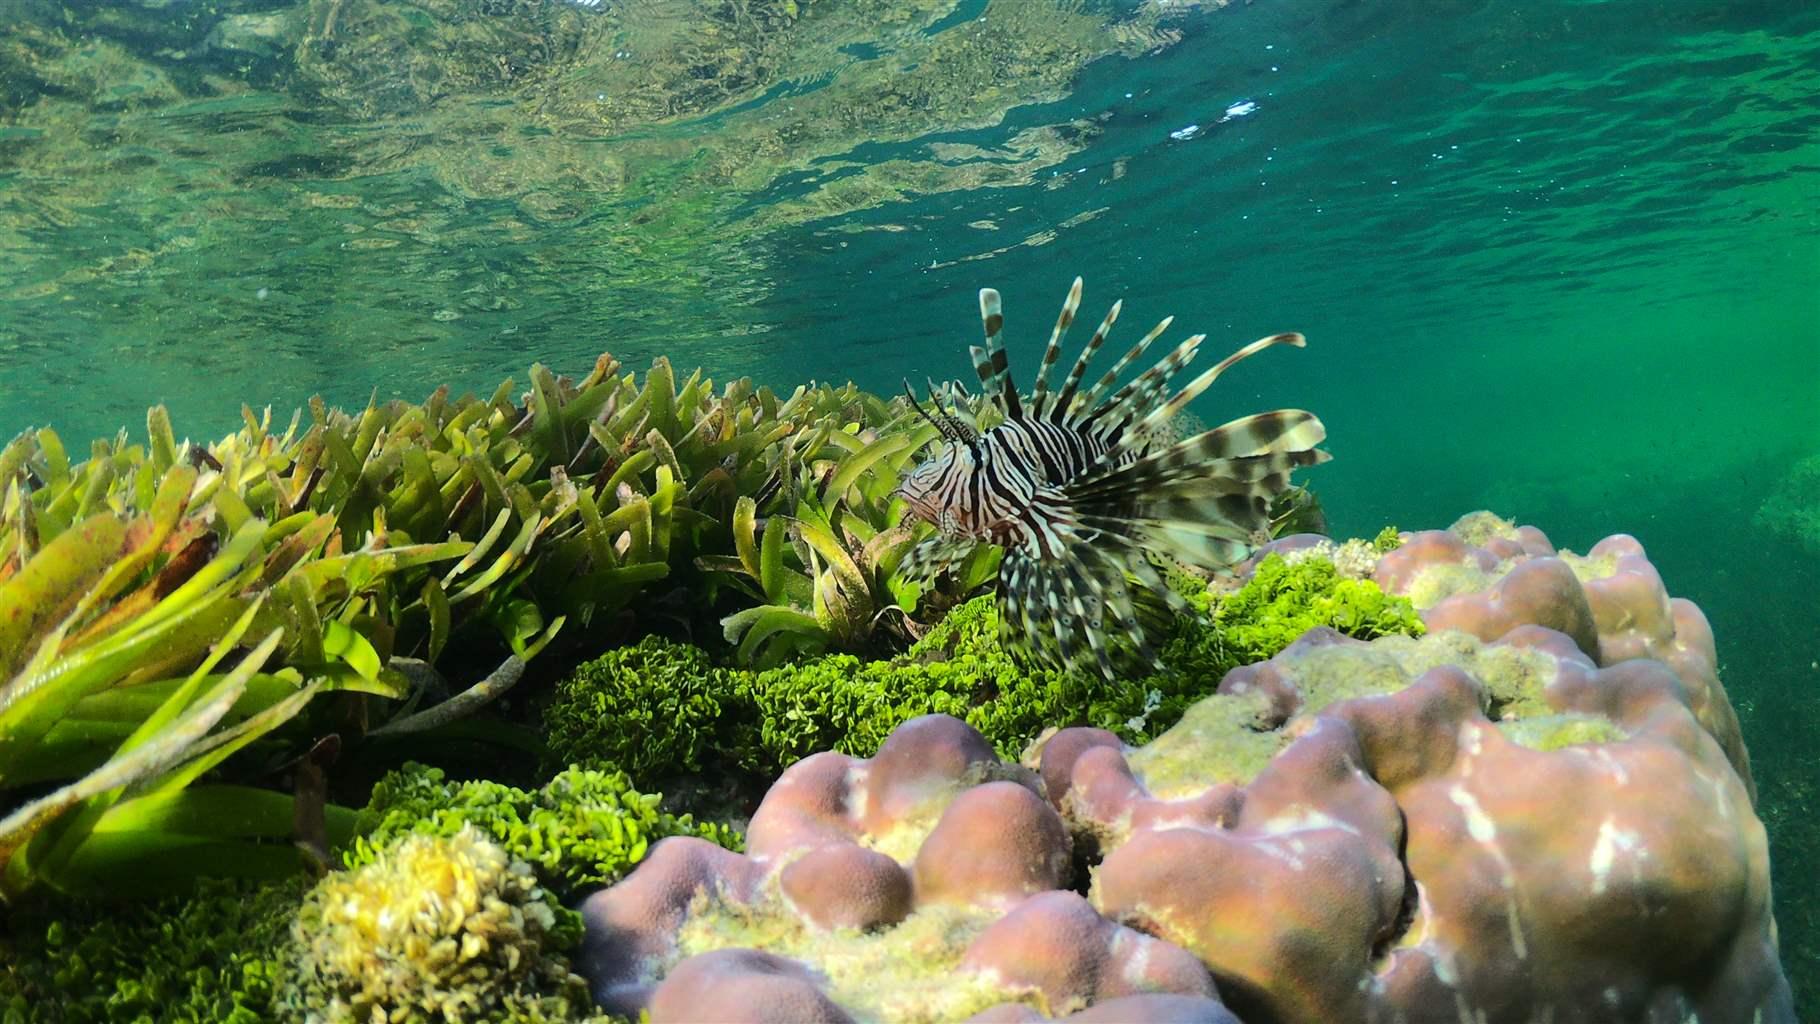 A striped lionfish swims above green leafy seagrass, and pinkish coral off the coast of Seychelles.